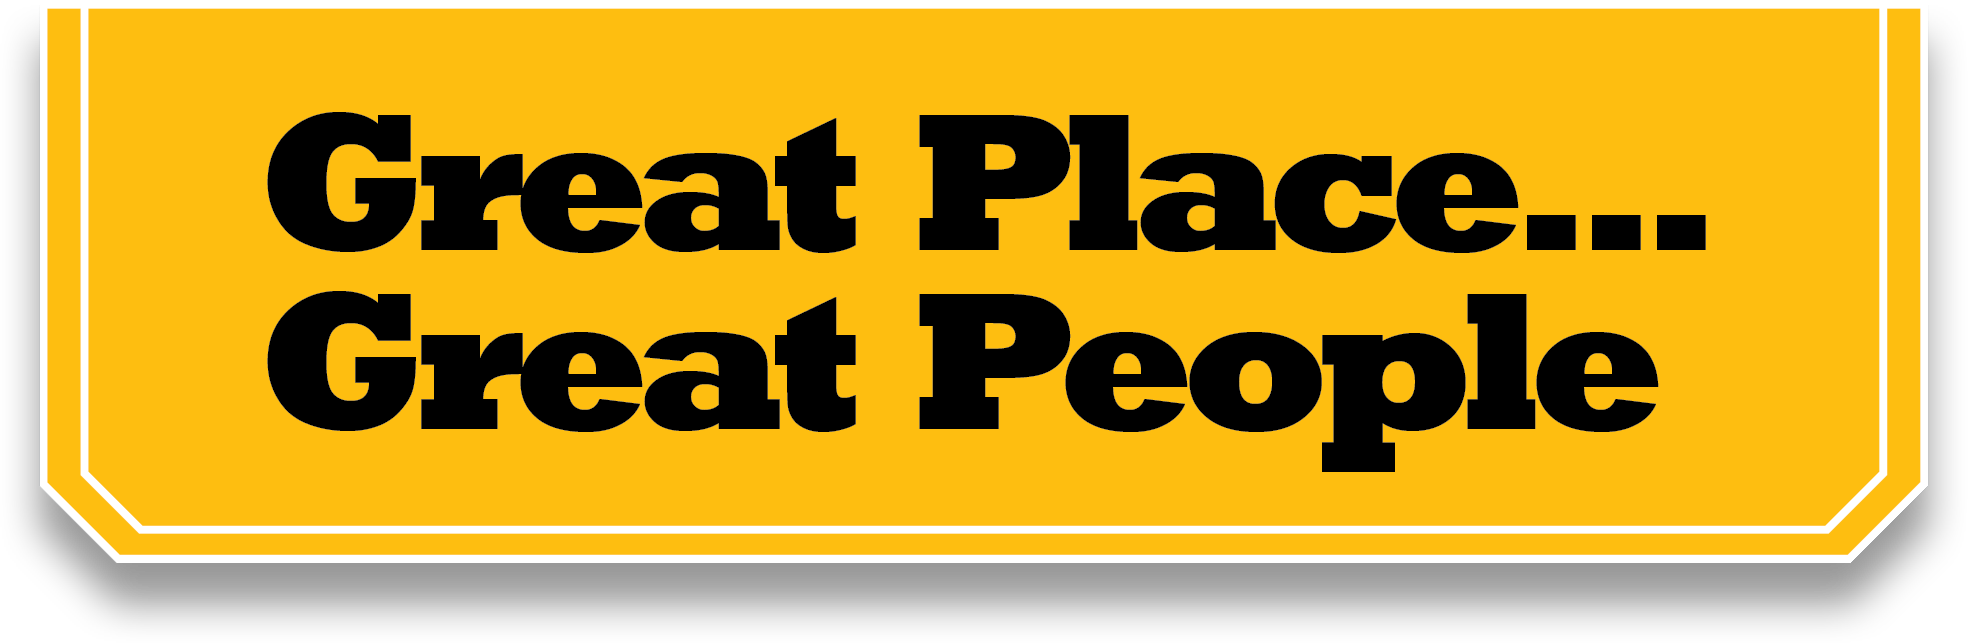 Great Place Great People logo